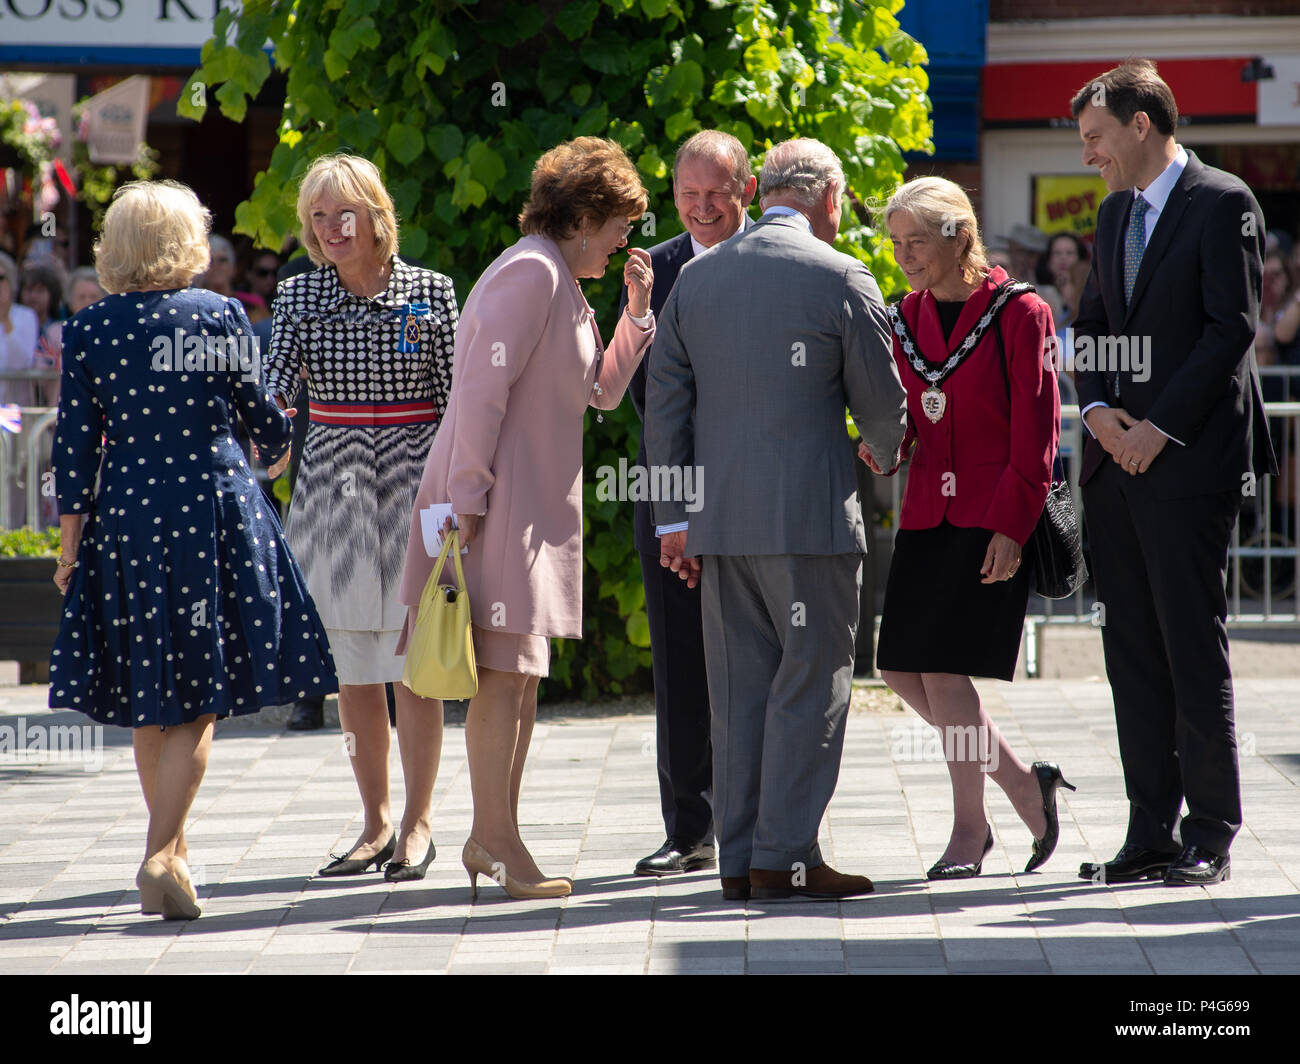 Salisbury, Wiltshire, UK, 22nd June 2018. HRH Prince Charles, the Prince of Wales and Camilla, Duchess of Cornwall meet dignitaries on a visit to Salisbury. The royal couple’s visit is to support the city’s recovery where visitor numbers have fallen and businesses suffered after the nerve agent attack in March 2018. Stock Photo